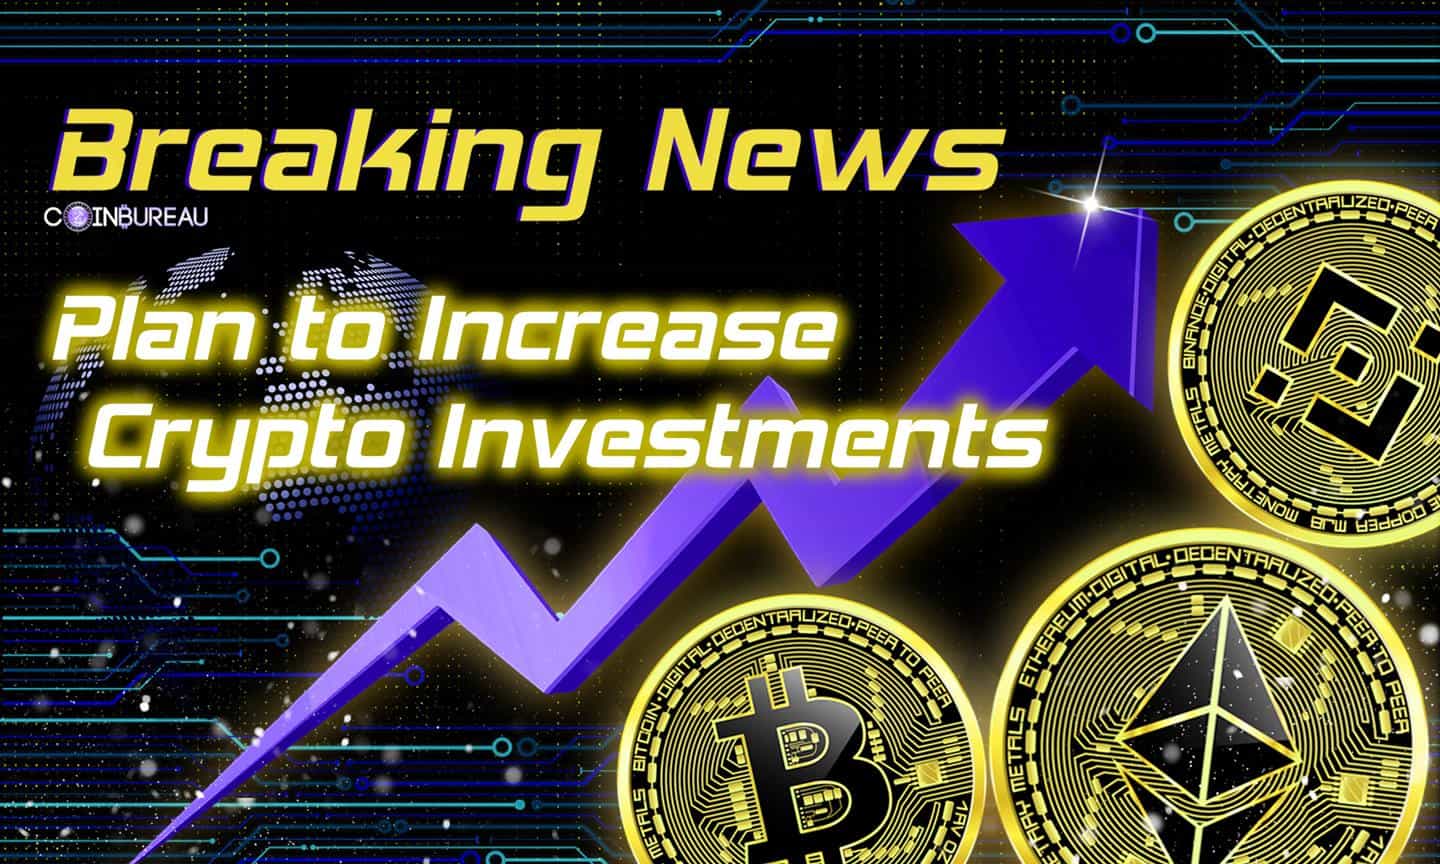 Vast Majority of Investors in Emerging Markets Plan to Increase their Crypto Investments